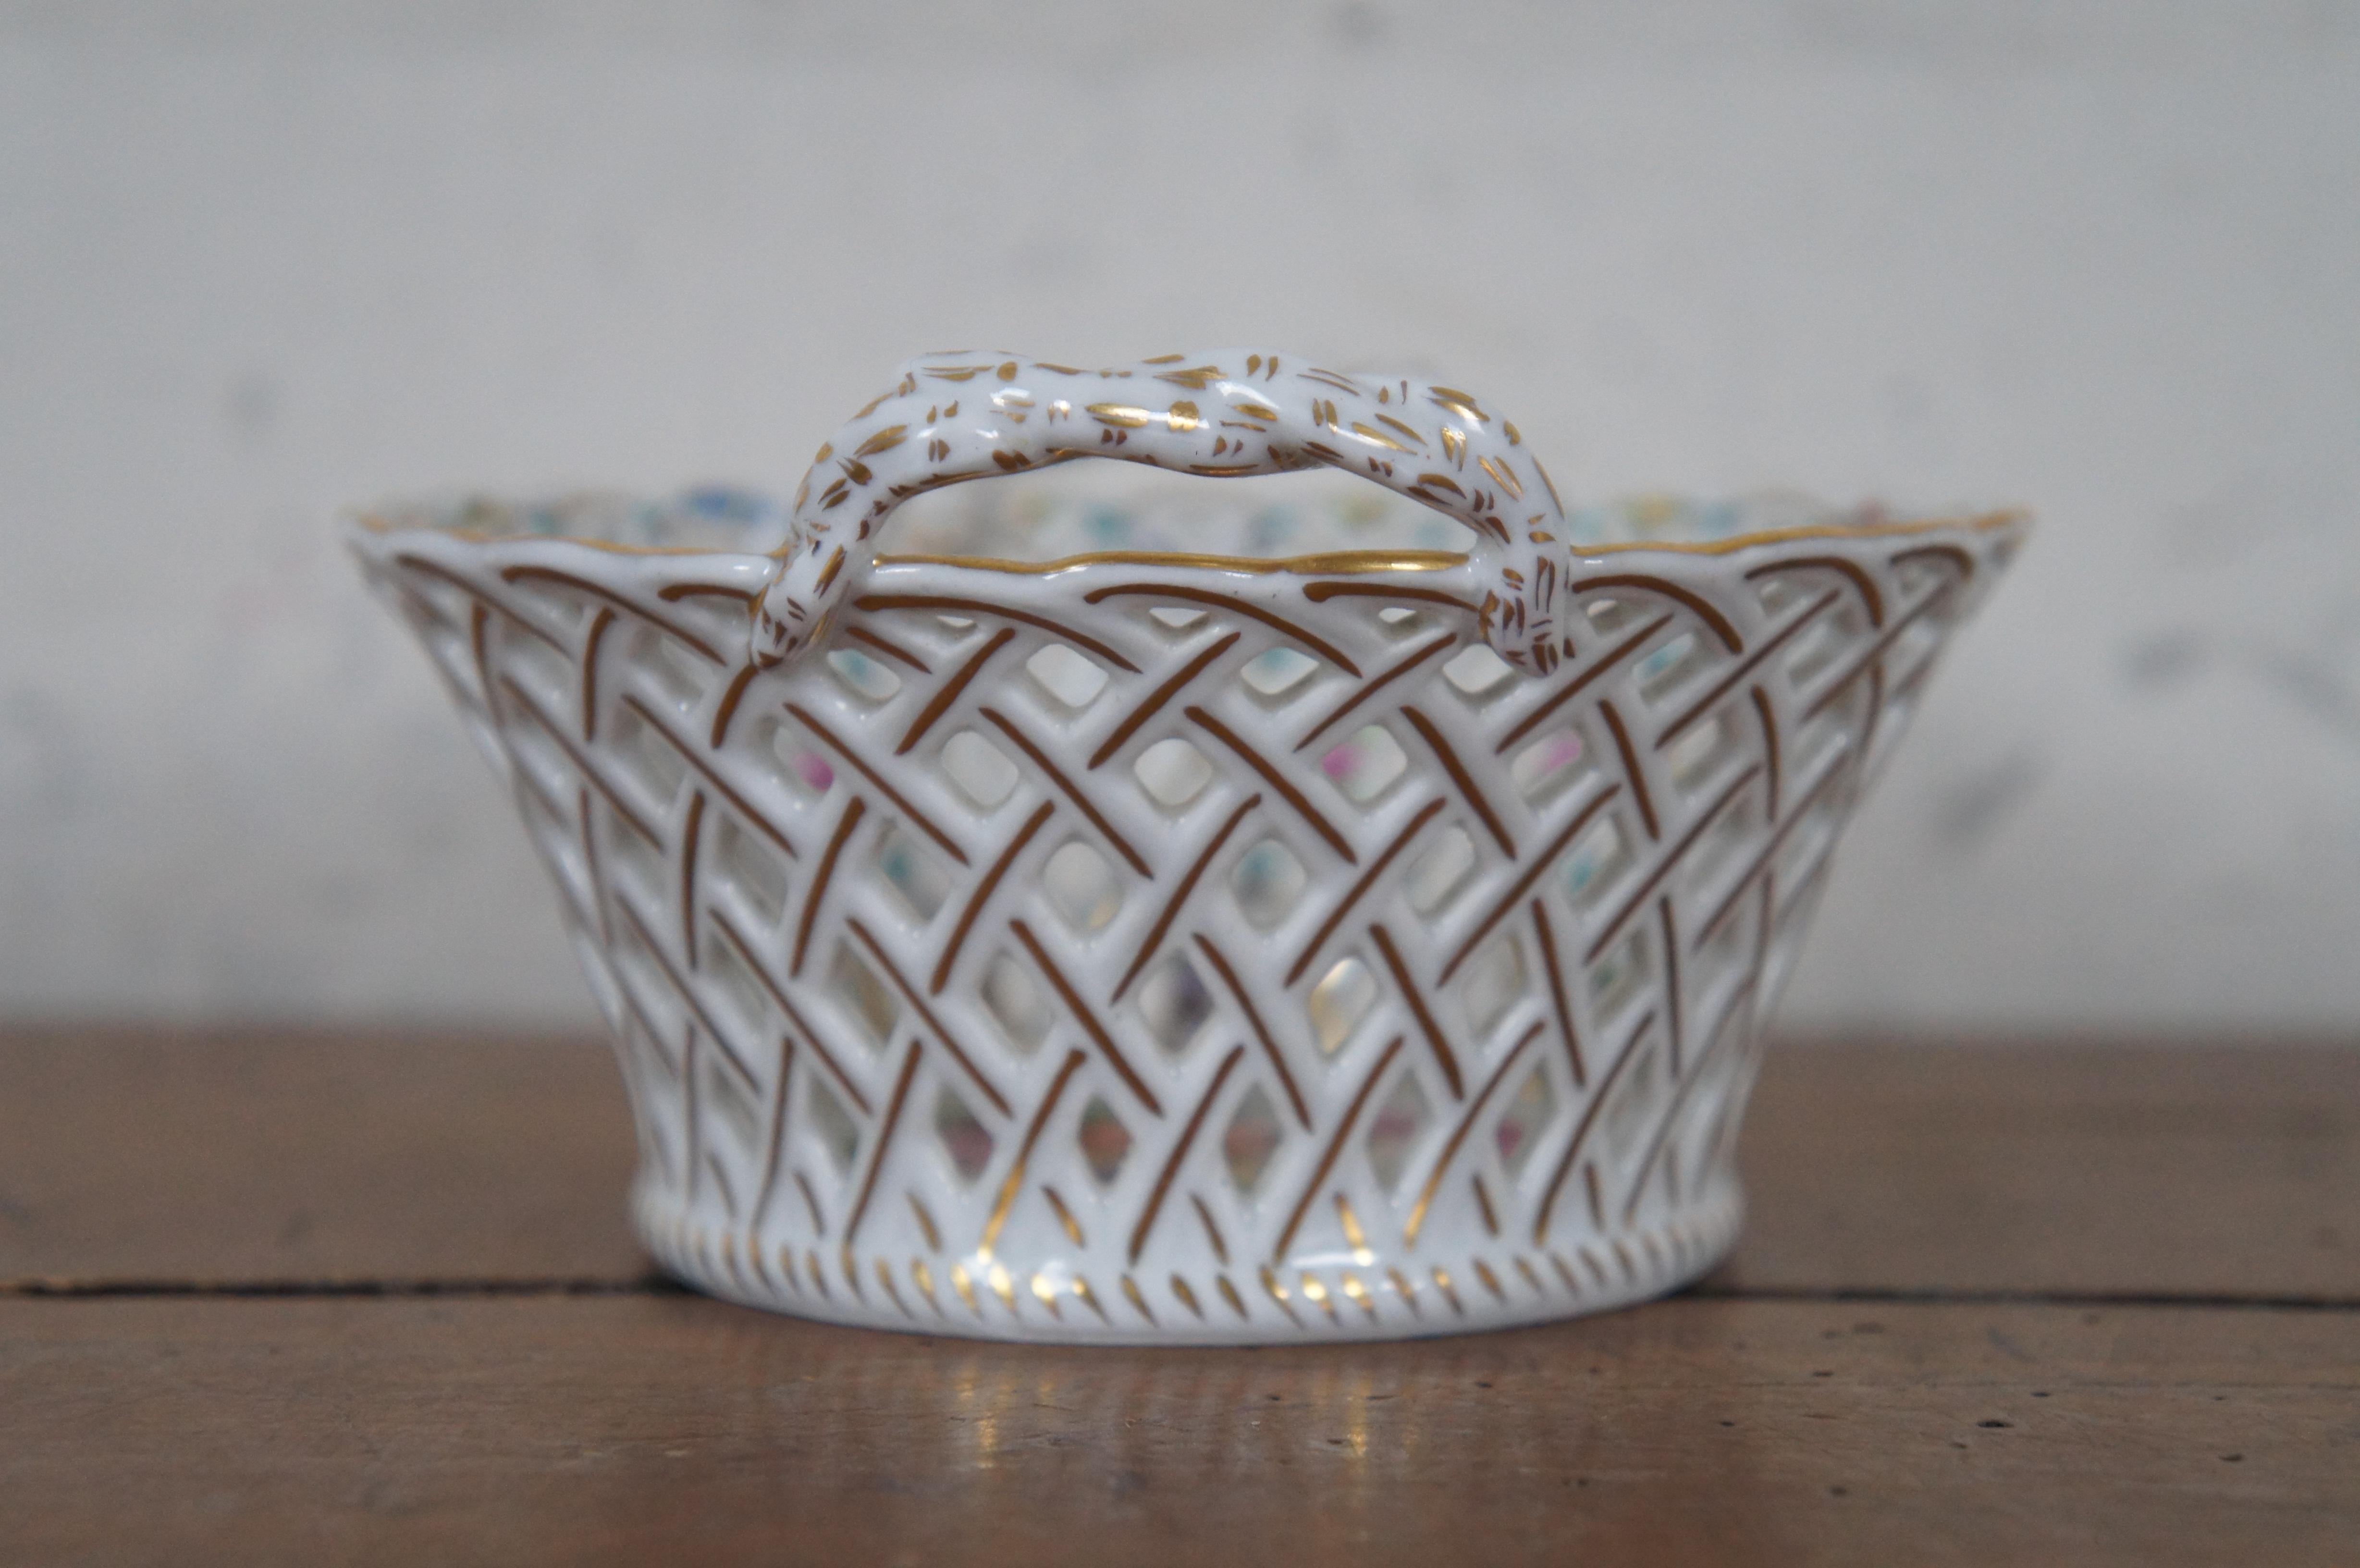 20th Century Vintage Dresden Porcelain Hand Painted Reticulated Basket Weave Handled Bowl 6